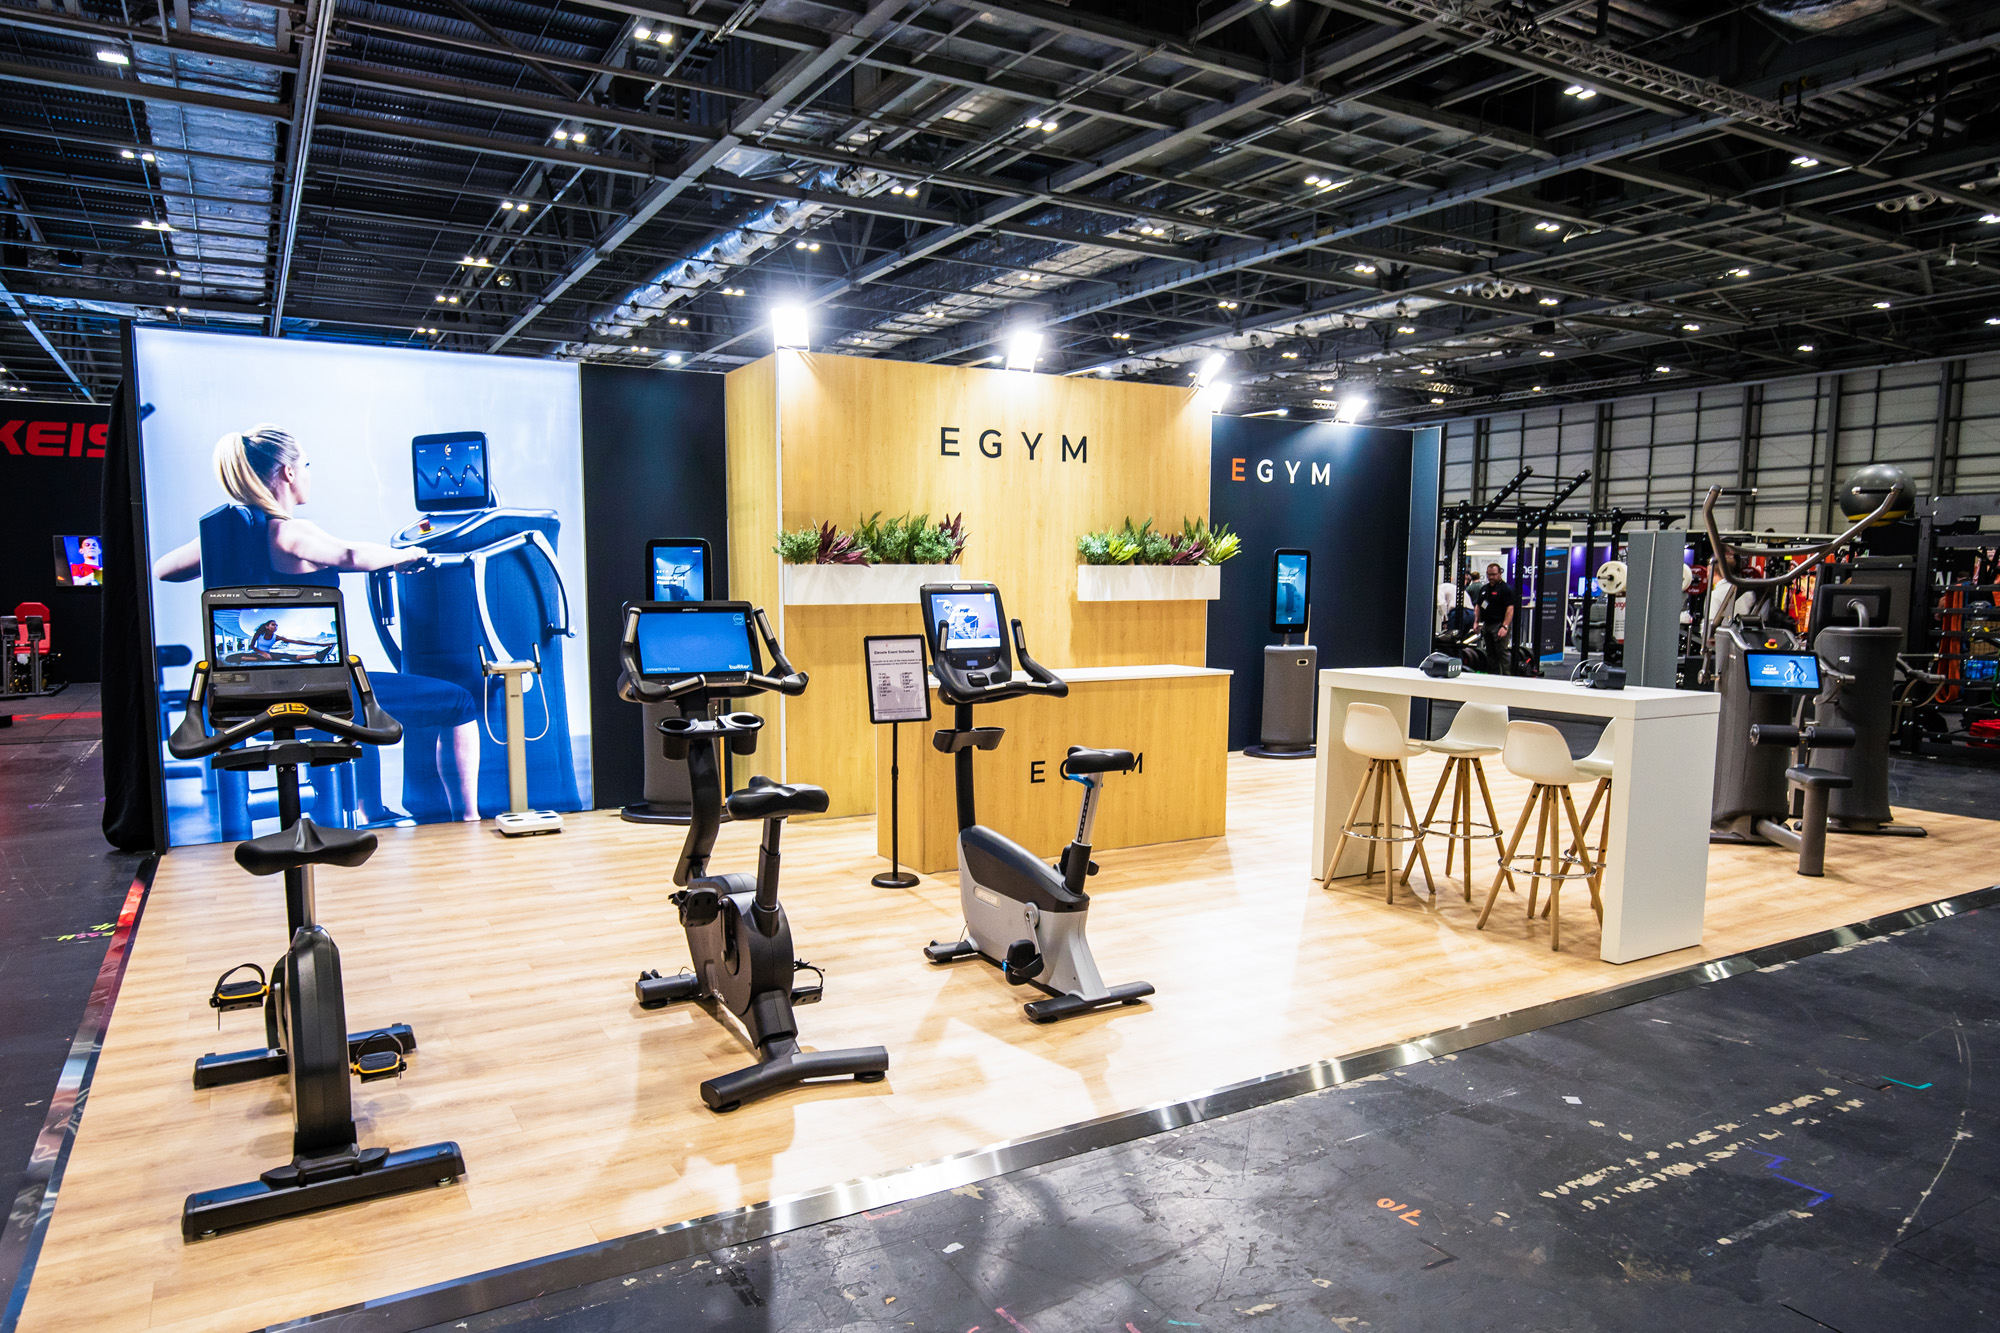 EGYM exhibition trade show stand at Elevate